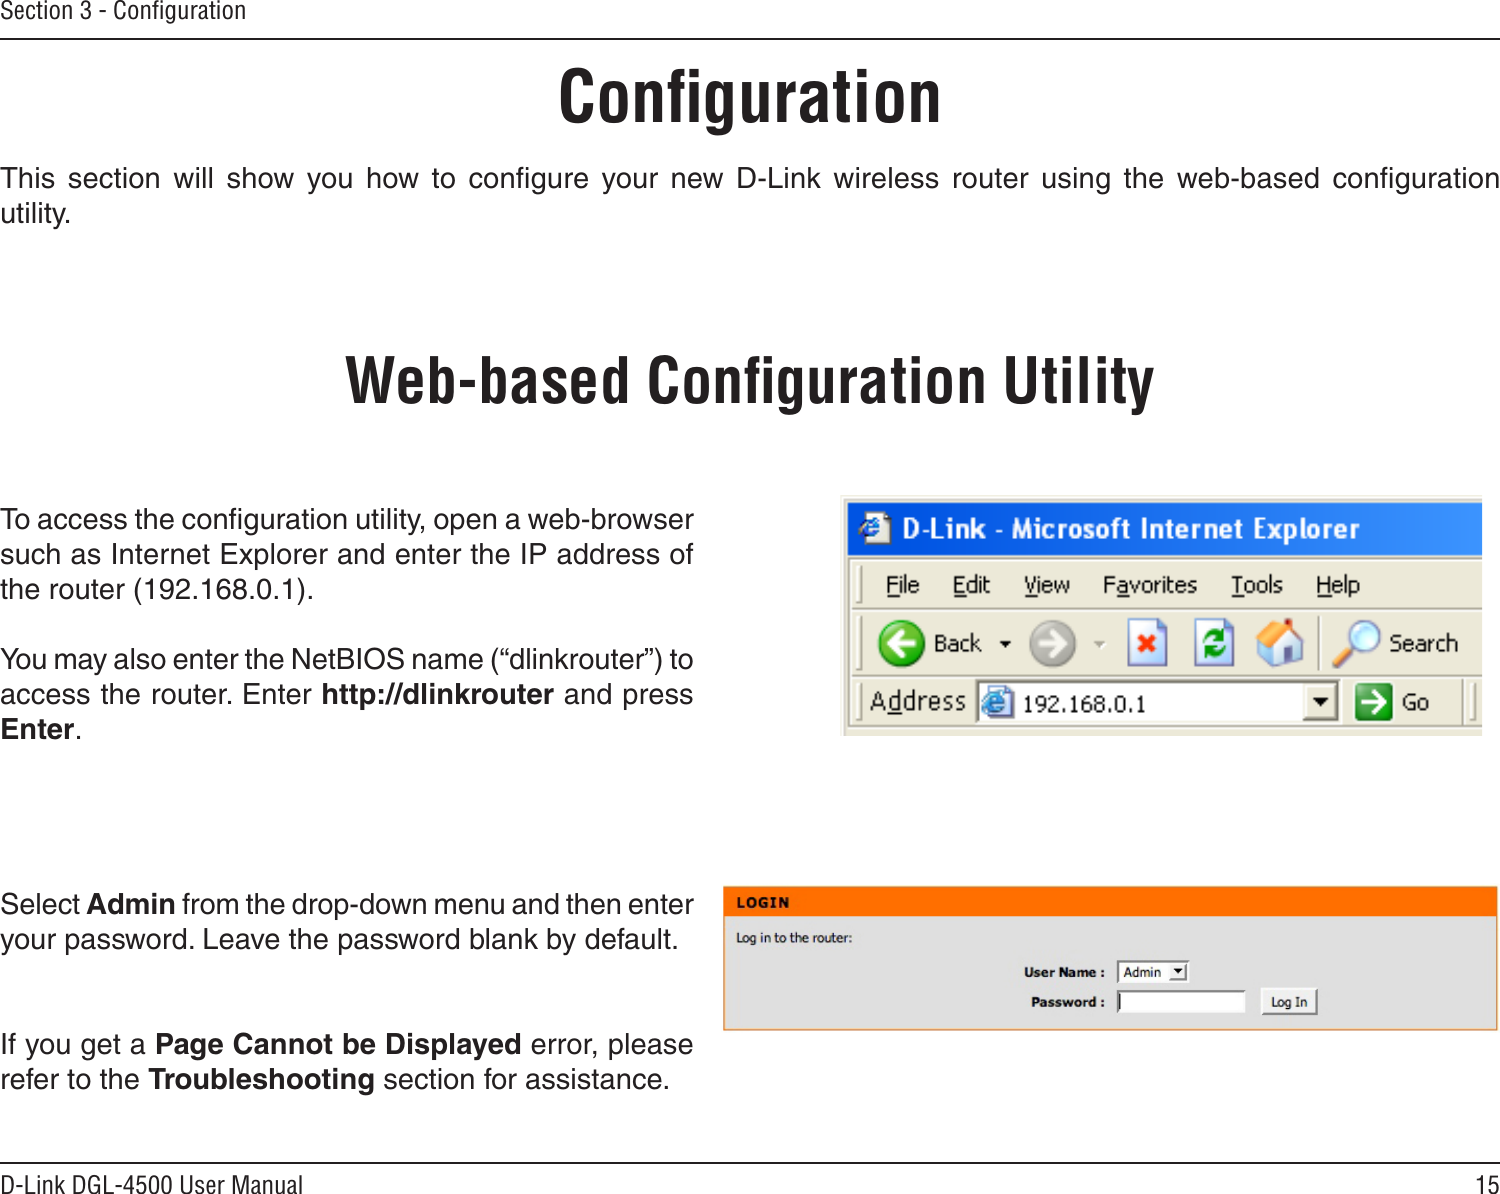 15D-Link DGL-4500 User ManualSection 3 - ConﬁgurationConﬁgurationThis  section  will  show  you  how  to  conﬁgure  your  new  D-Link  wireless  router  using  the  web-based  conﬁguration utility.Web-based Conﬁguration UtilityTo access the conﬁguration utility, open a web-browser such as Internet Explorer and enter the IP address of the router (192.168.0.1).You may also enter the NetBIOS name (“dlinkrouter”) to access the router. Enter http://dlinkrouter and press Enter. Select Admin from the drop-down menu and then enter your password. Leave the password blank by default.If you get a Page Cannot be Displayed error, please refer to the Troubleshooting section for assistance.